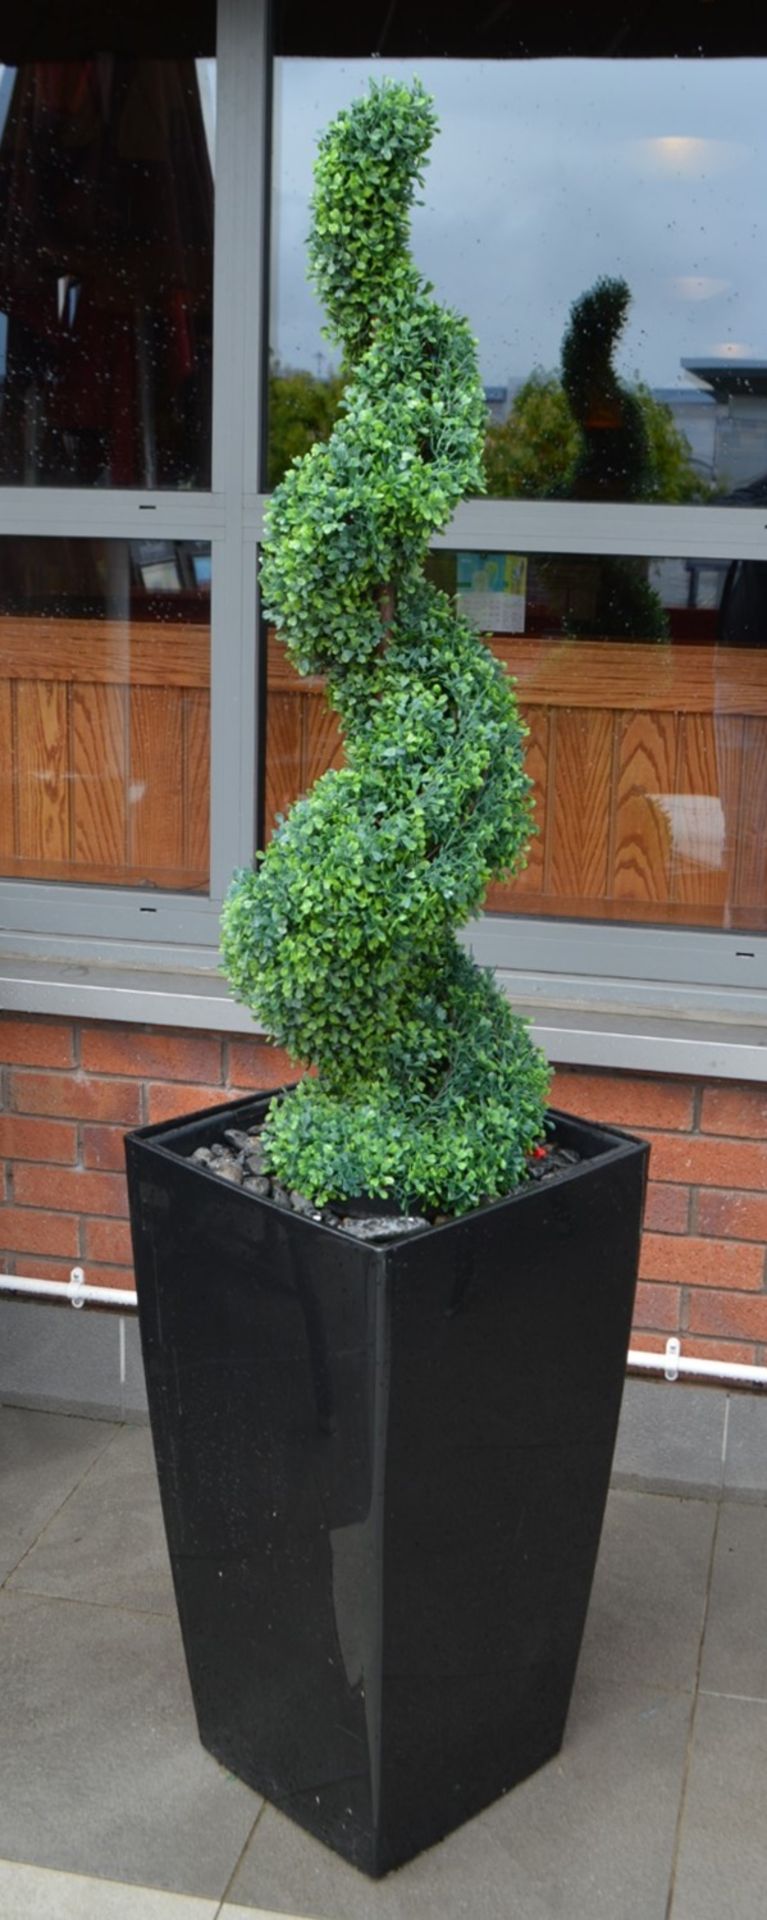 6 x Tall Artifical Outdoor Planters - Approx Height 172 cms - CL357 - Location: Bolton BL6 This